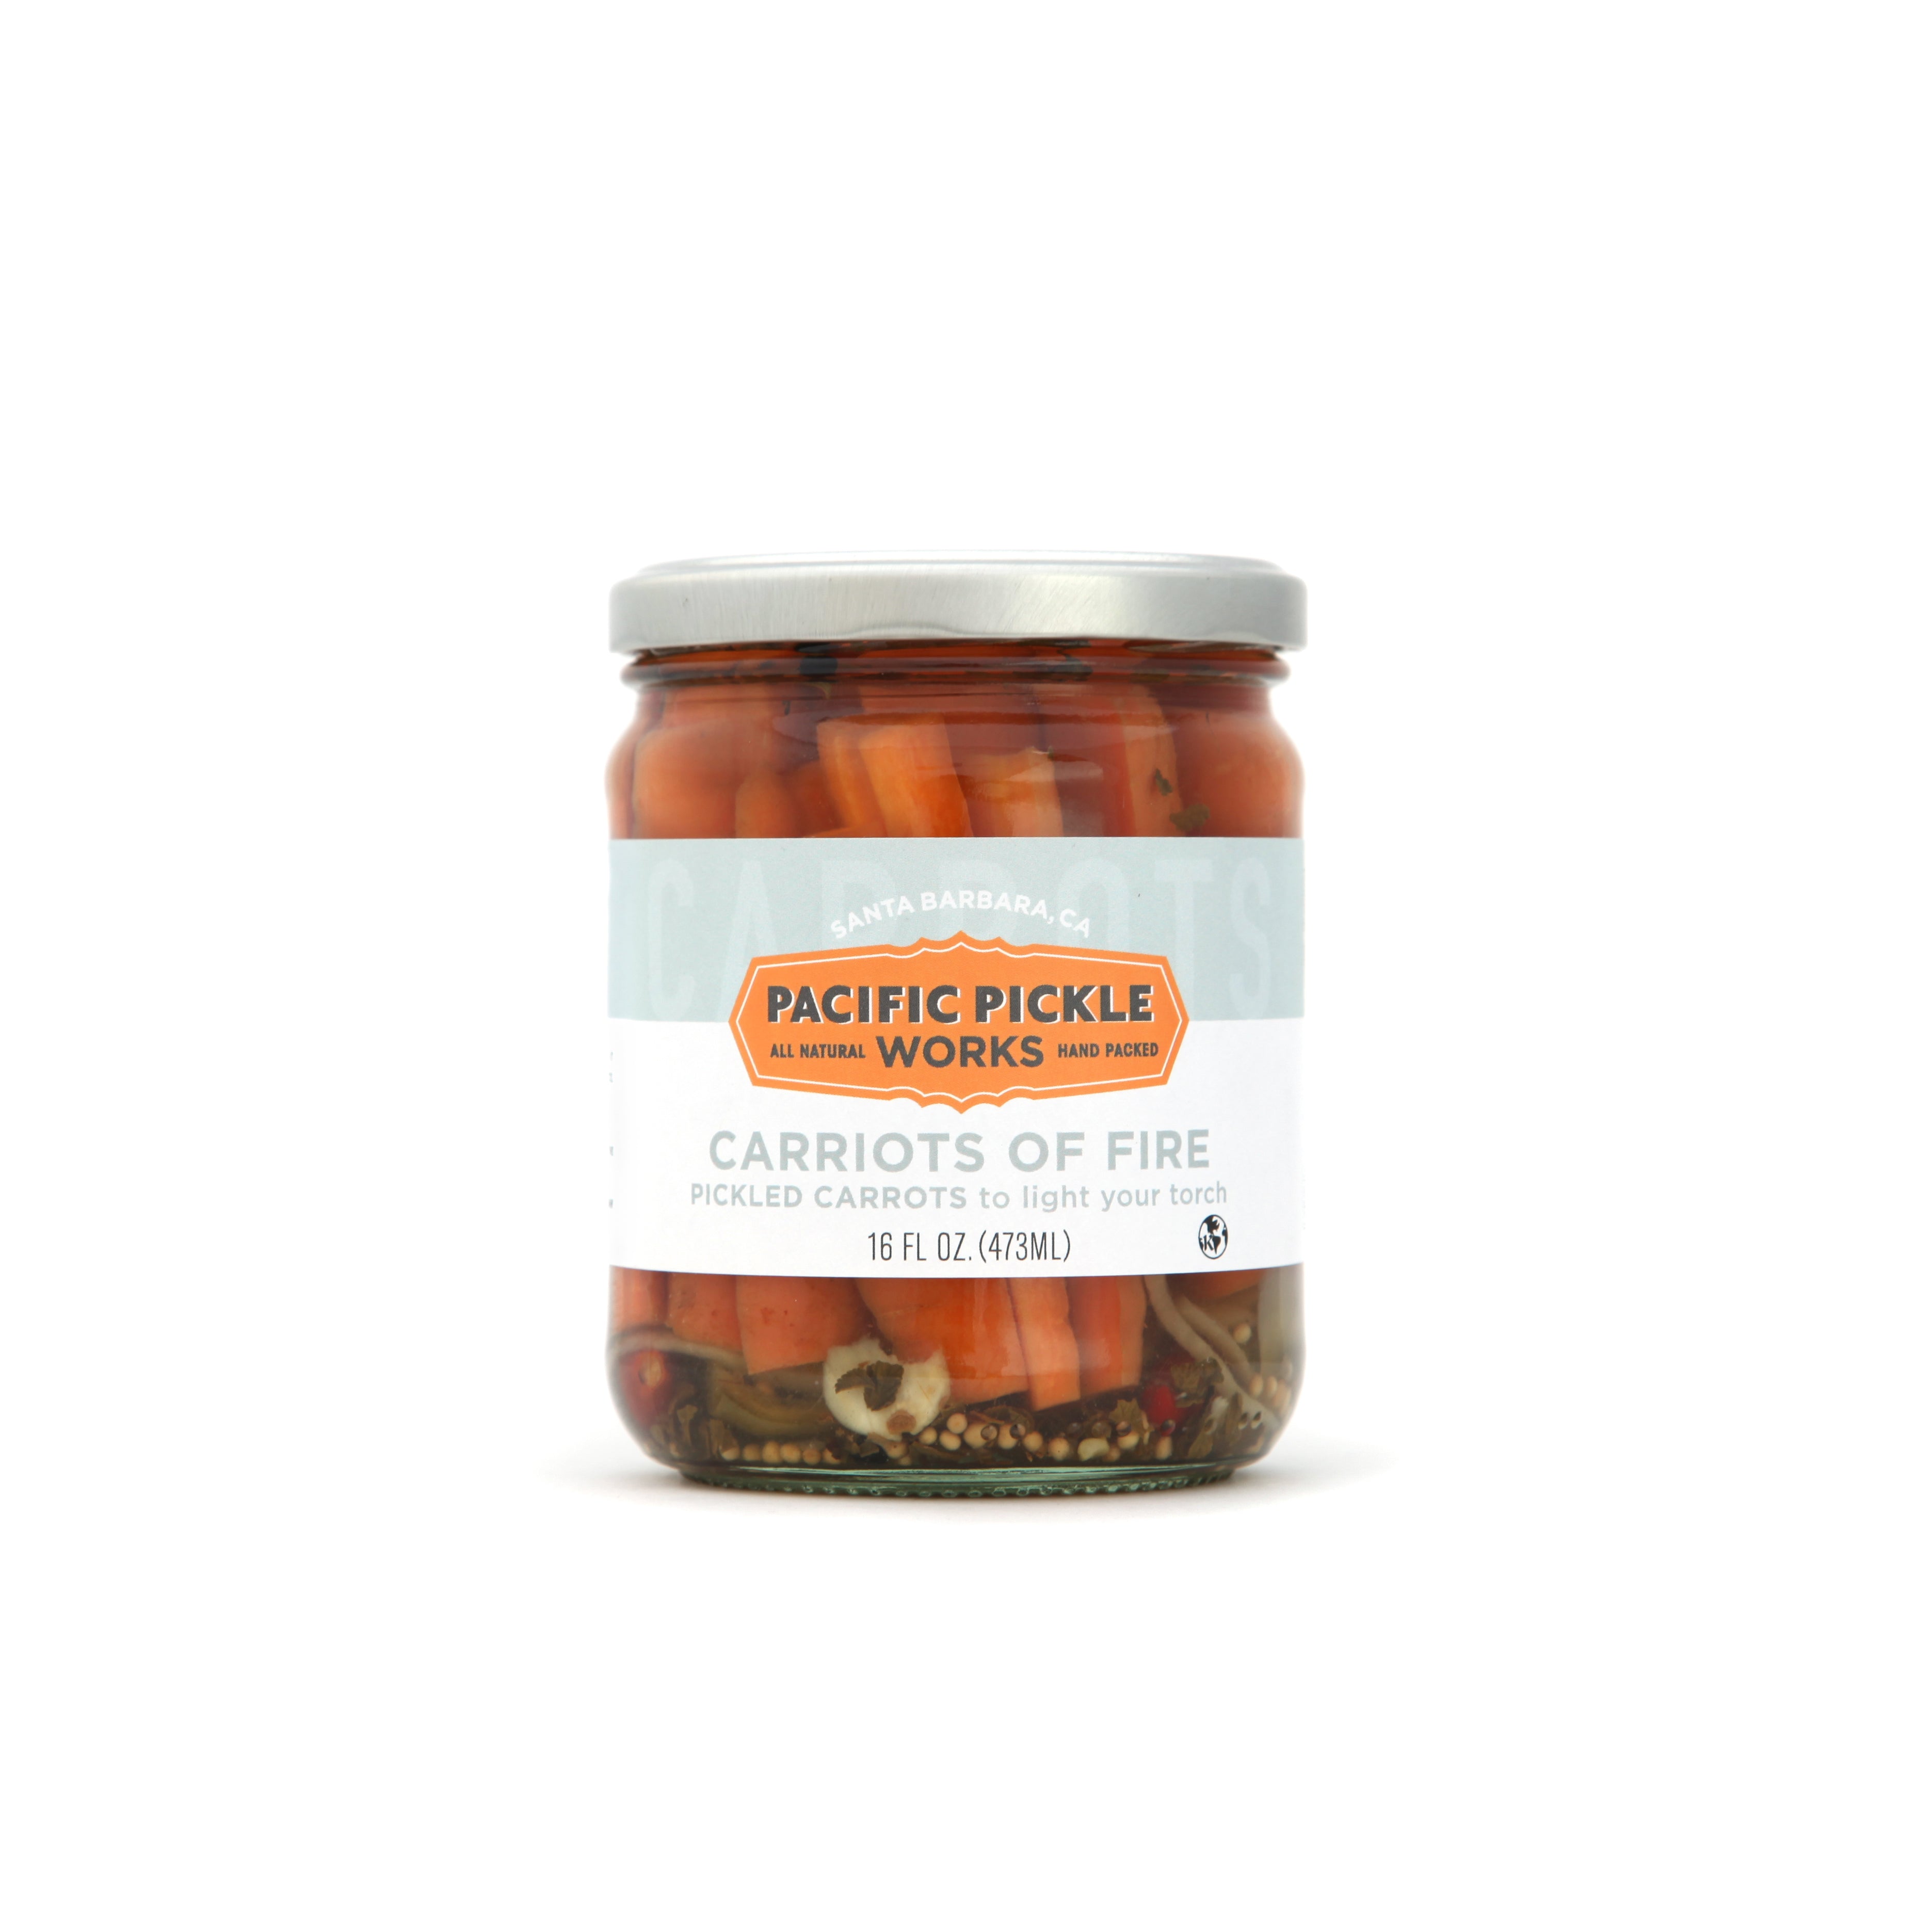 Pacific Pickle - Carriots of Fire 16 oz